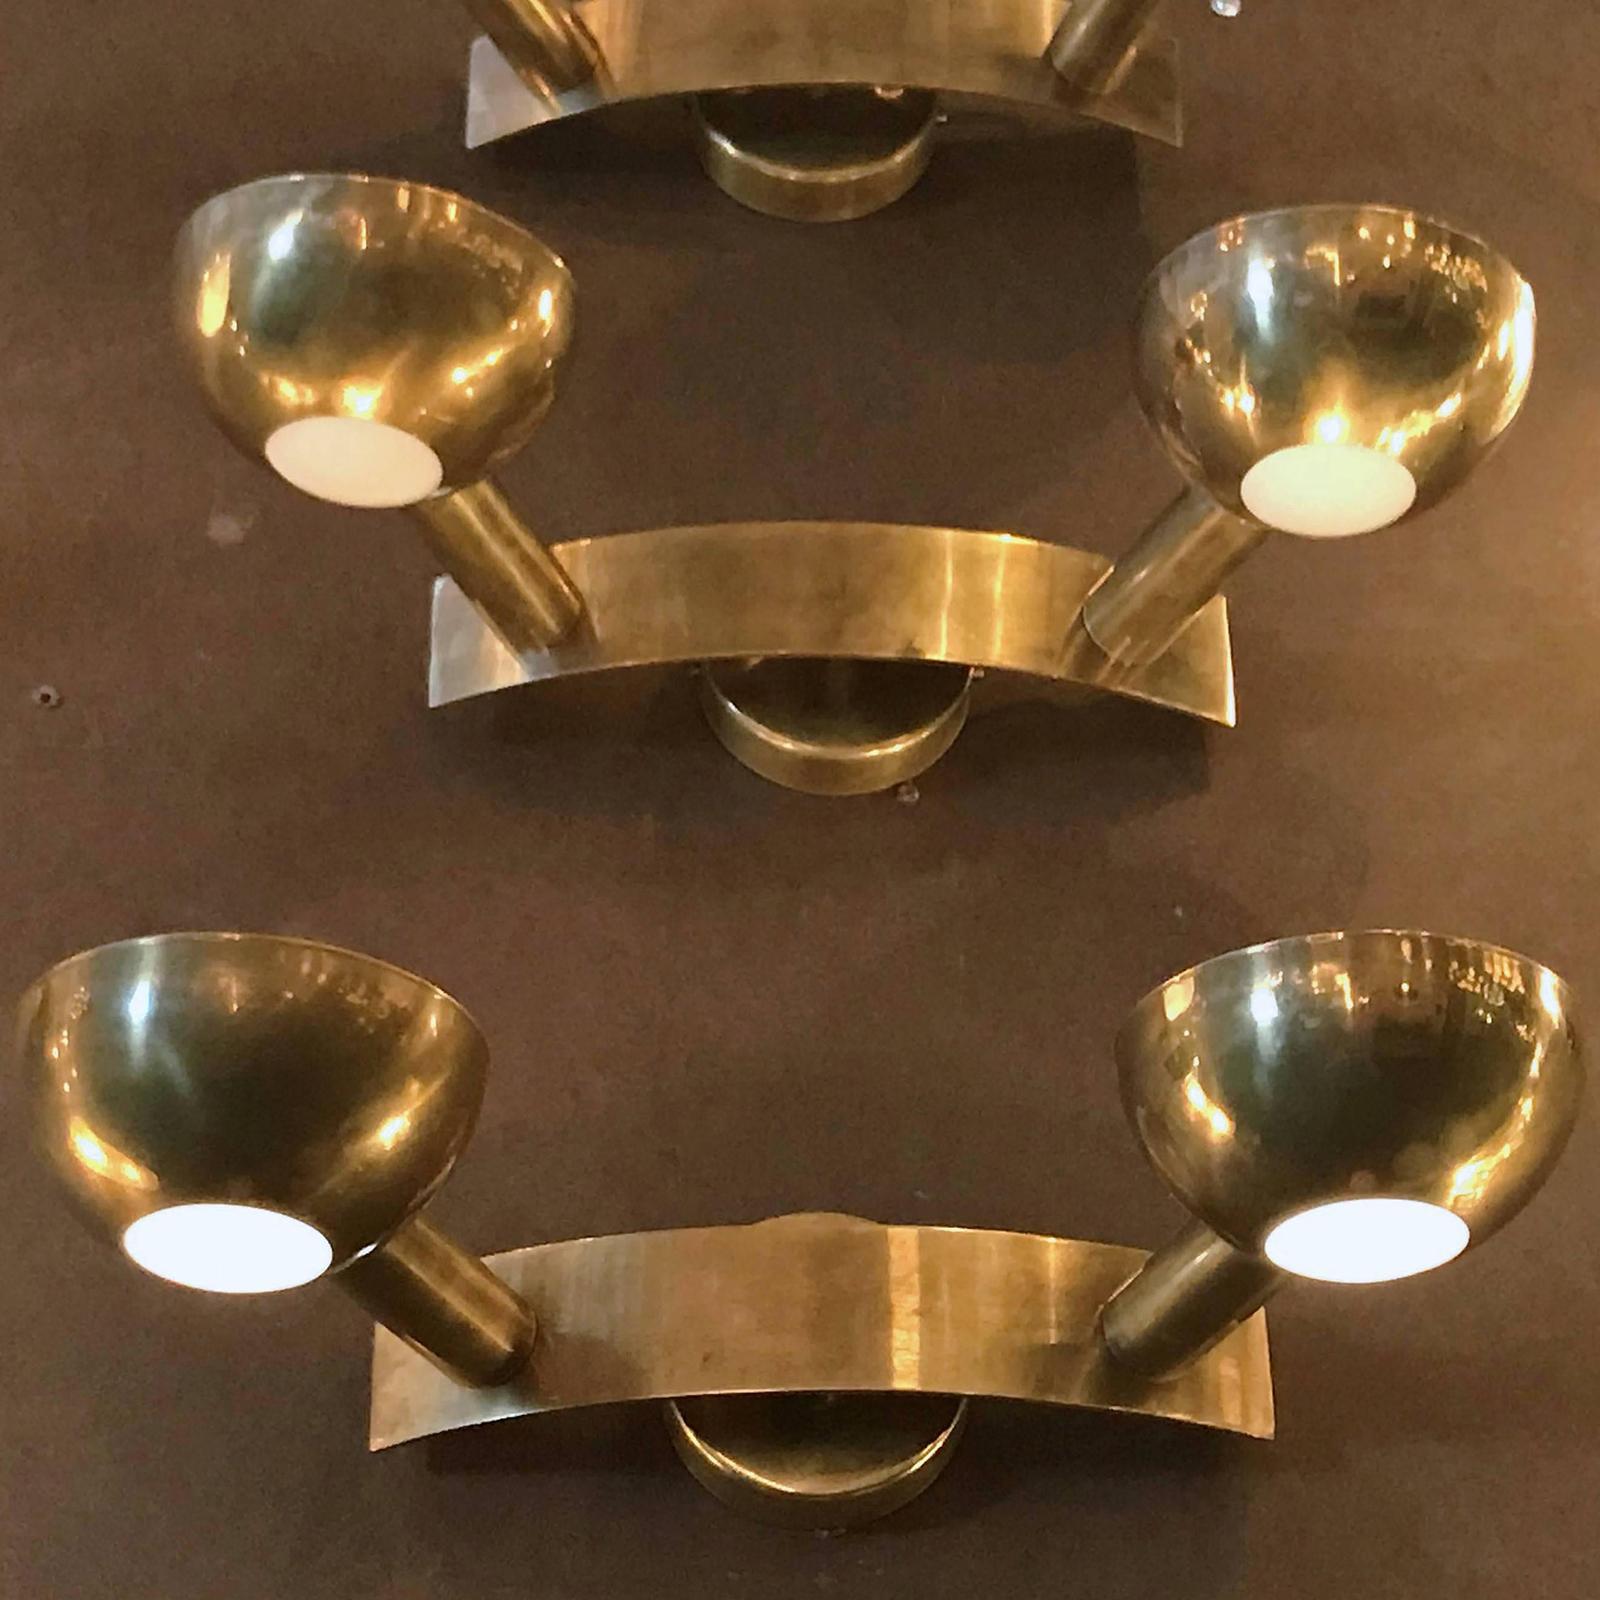 Set of four rare vintage w iconic Minimalist design, polished brass and frosted glass lenses / Style of Stilnovo, circa 1954 Made in Italy 2 lights.